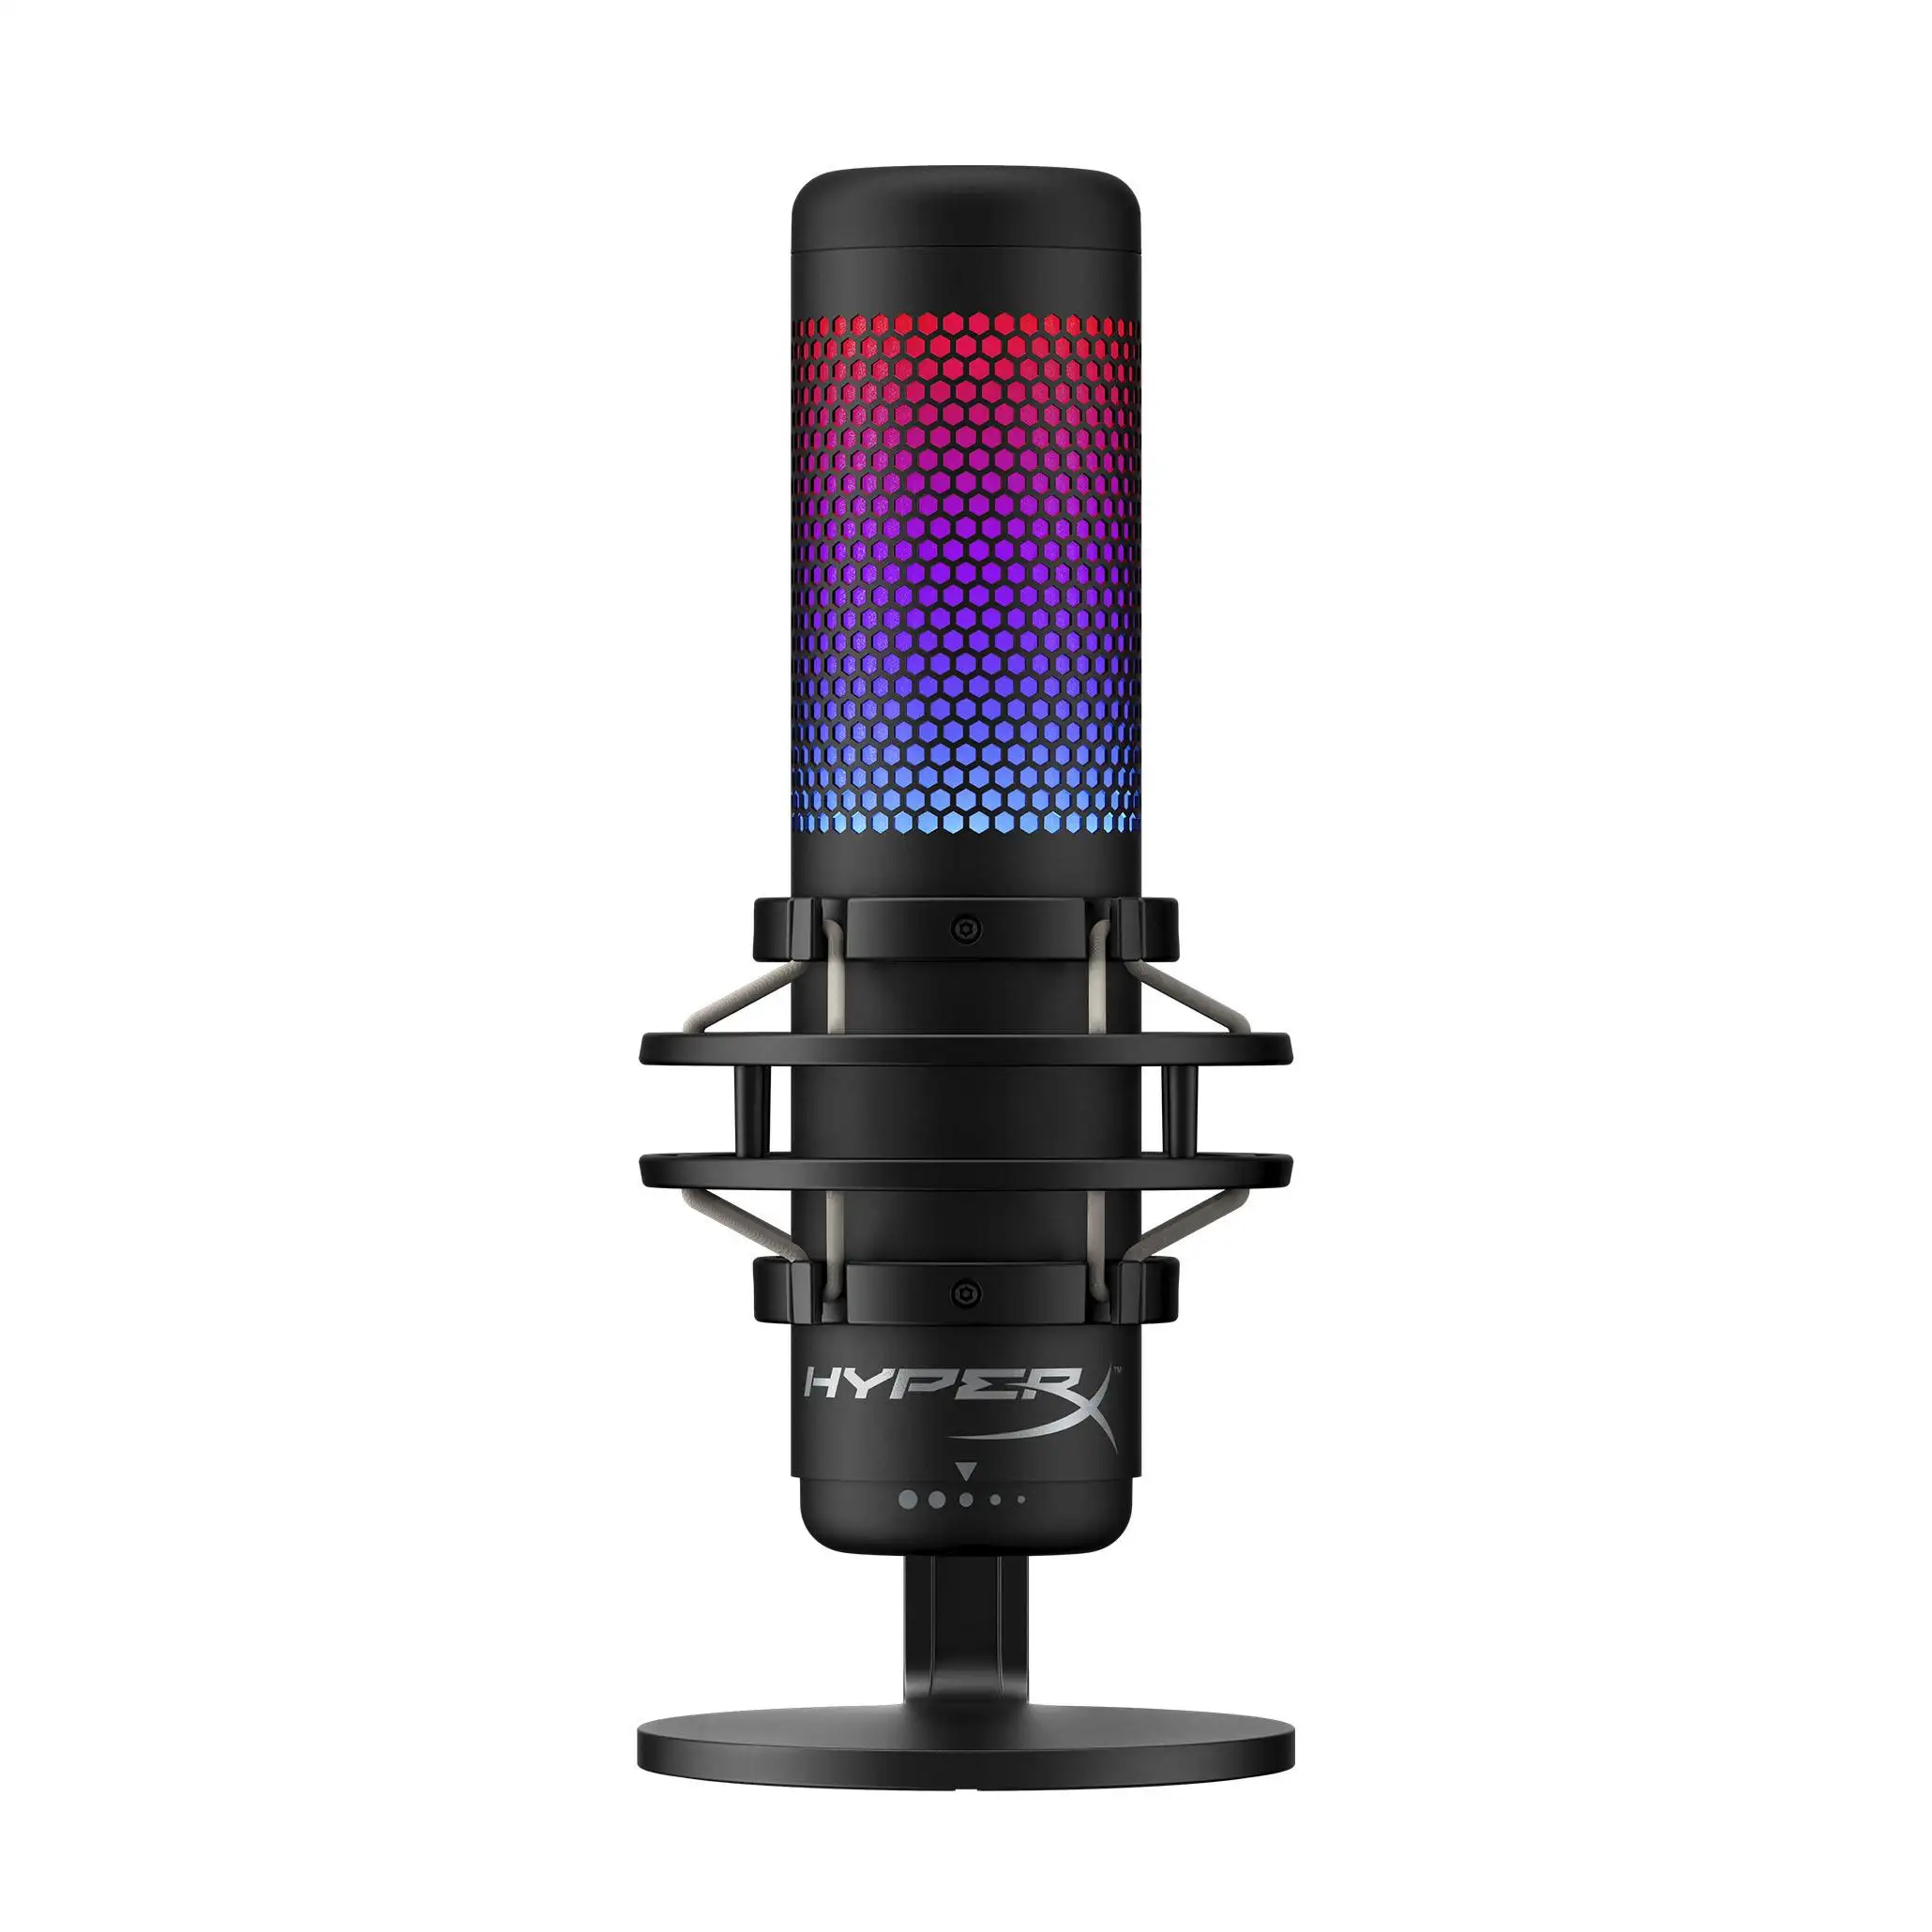 Original Hyper X QuadCast S USB Gaming Microphone with RGB Lighting for PC PS4 PS5 and Mac